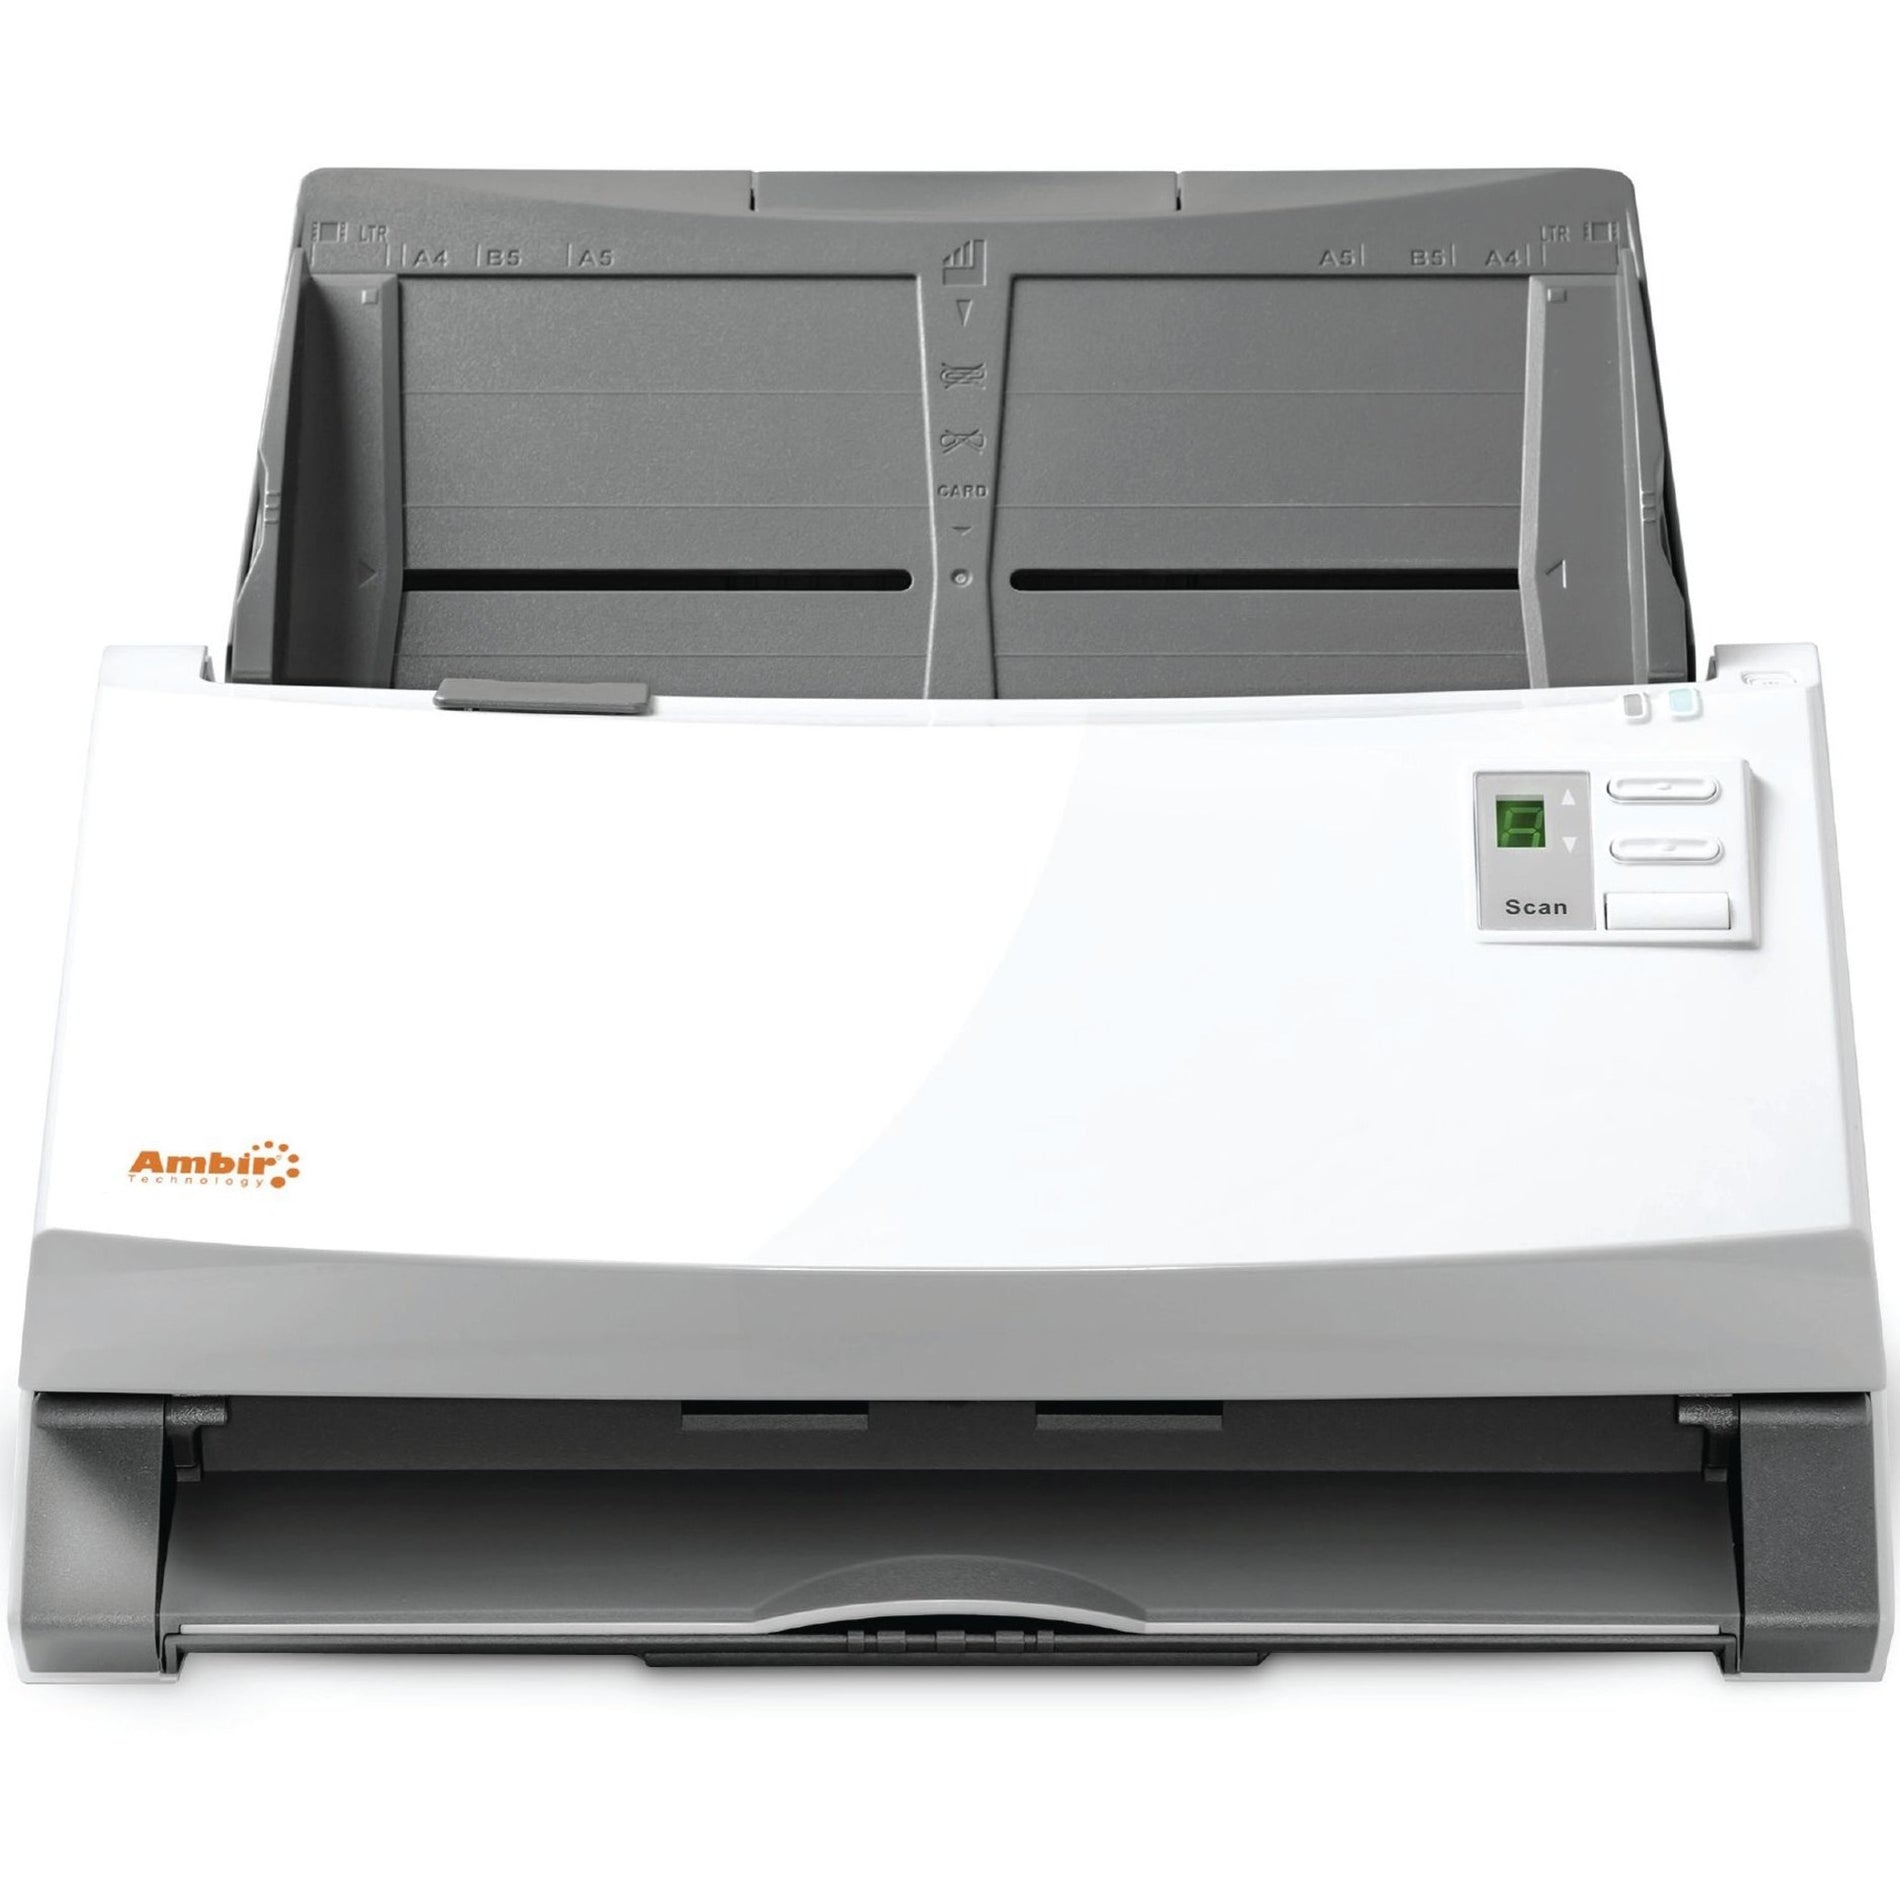 Ambir DS340-AS ImageScan Pro 340u Duplex Sheetfed Scanner - Fast and Efficient Scanning for Cards and Documents